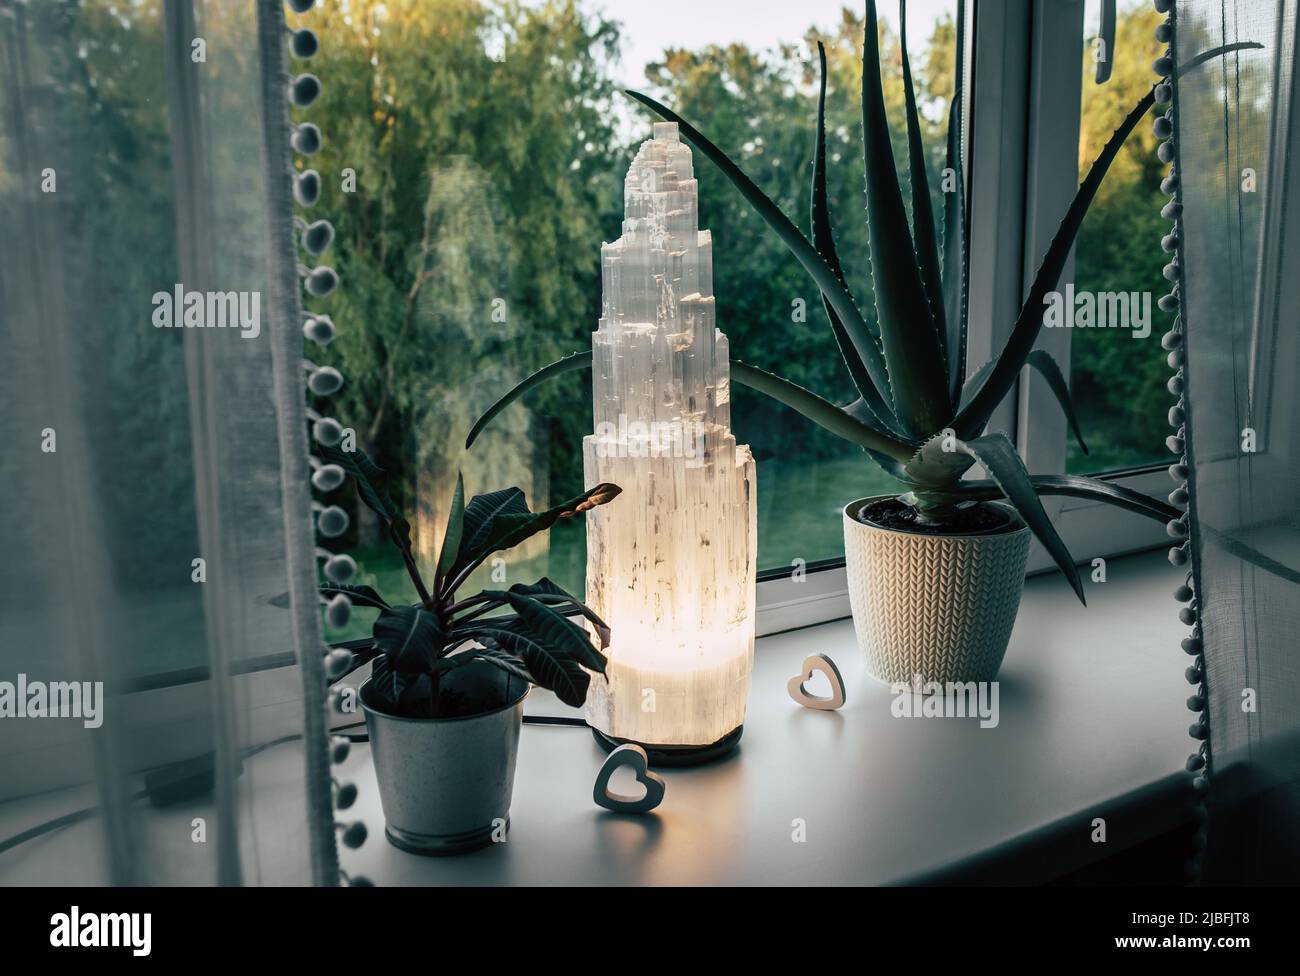 Rough big selenite crystal tower pole lamp illuminated in home on window sill, summer forest on background, spiritual home decor accent and ambient mo Stock Photo